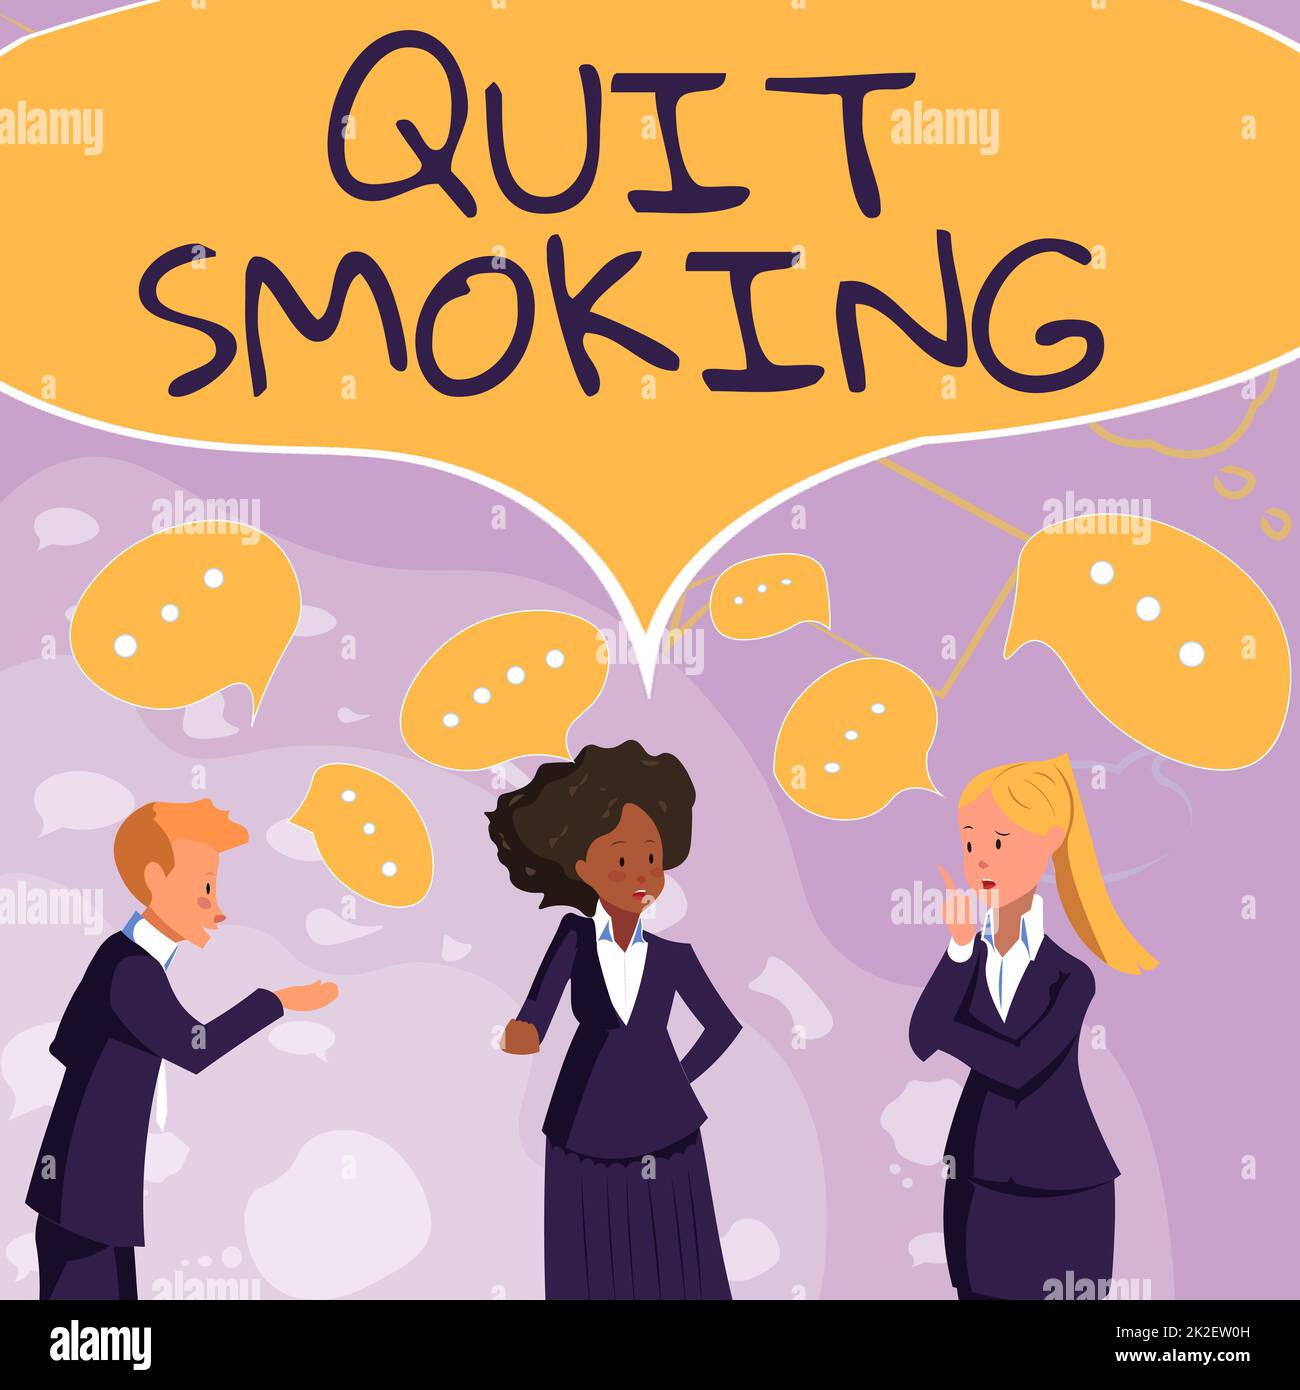 Conceptual display Quit Smoking. Business showcase process of discontinuing tobacco and any other smokers Illustration Of Partners Building New Wonderful Ideas For Skills Improvement. Stock Photo